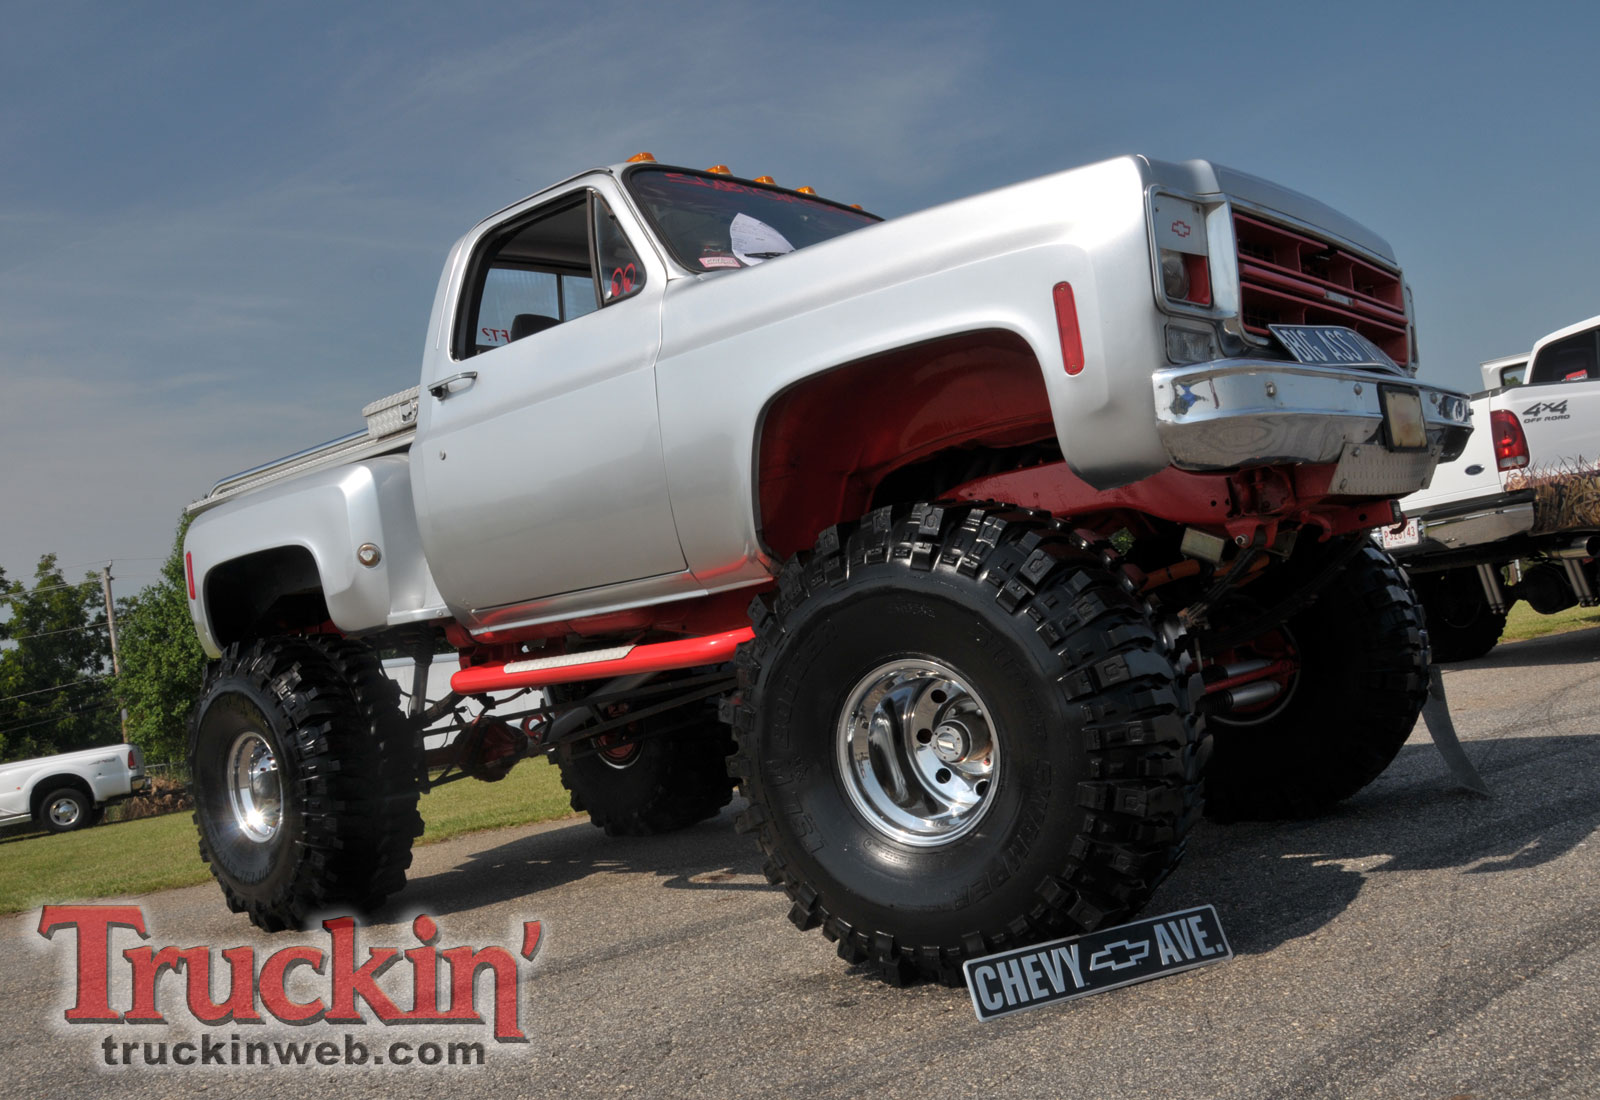 Lifted Chevy Truck Wallpaper Trucks Web Background Cake